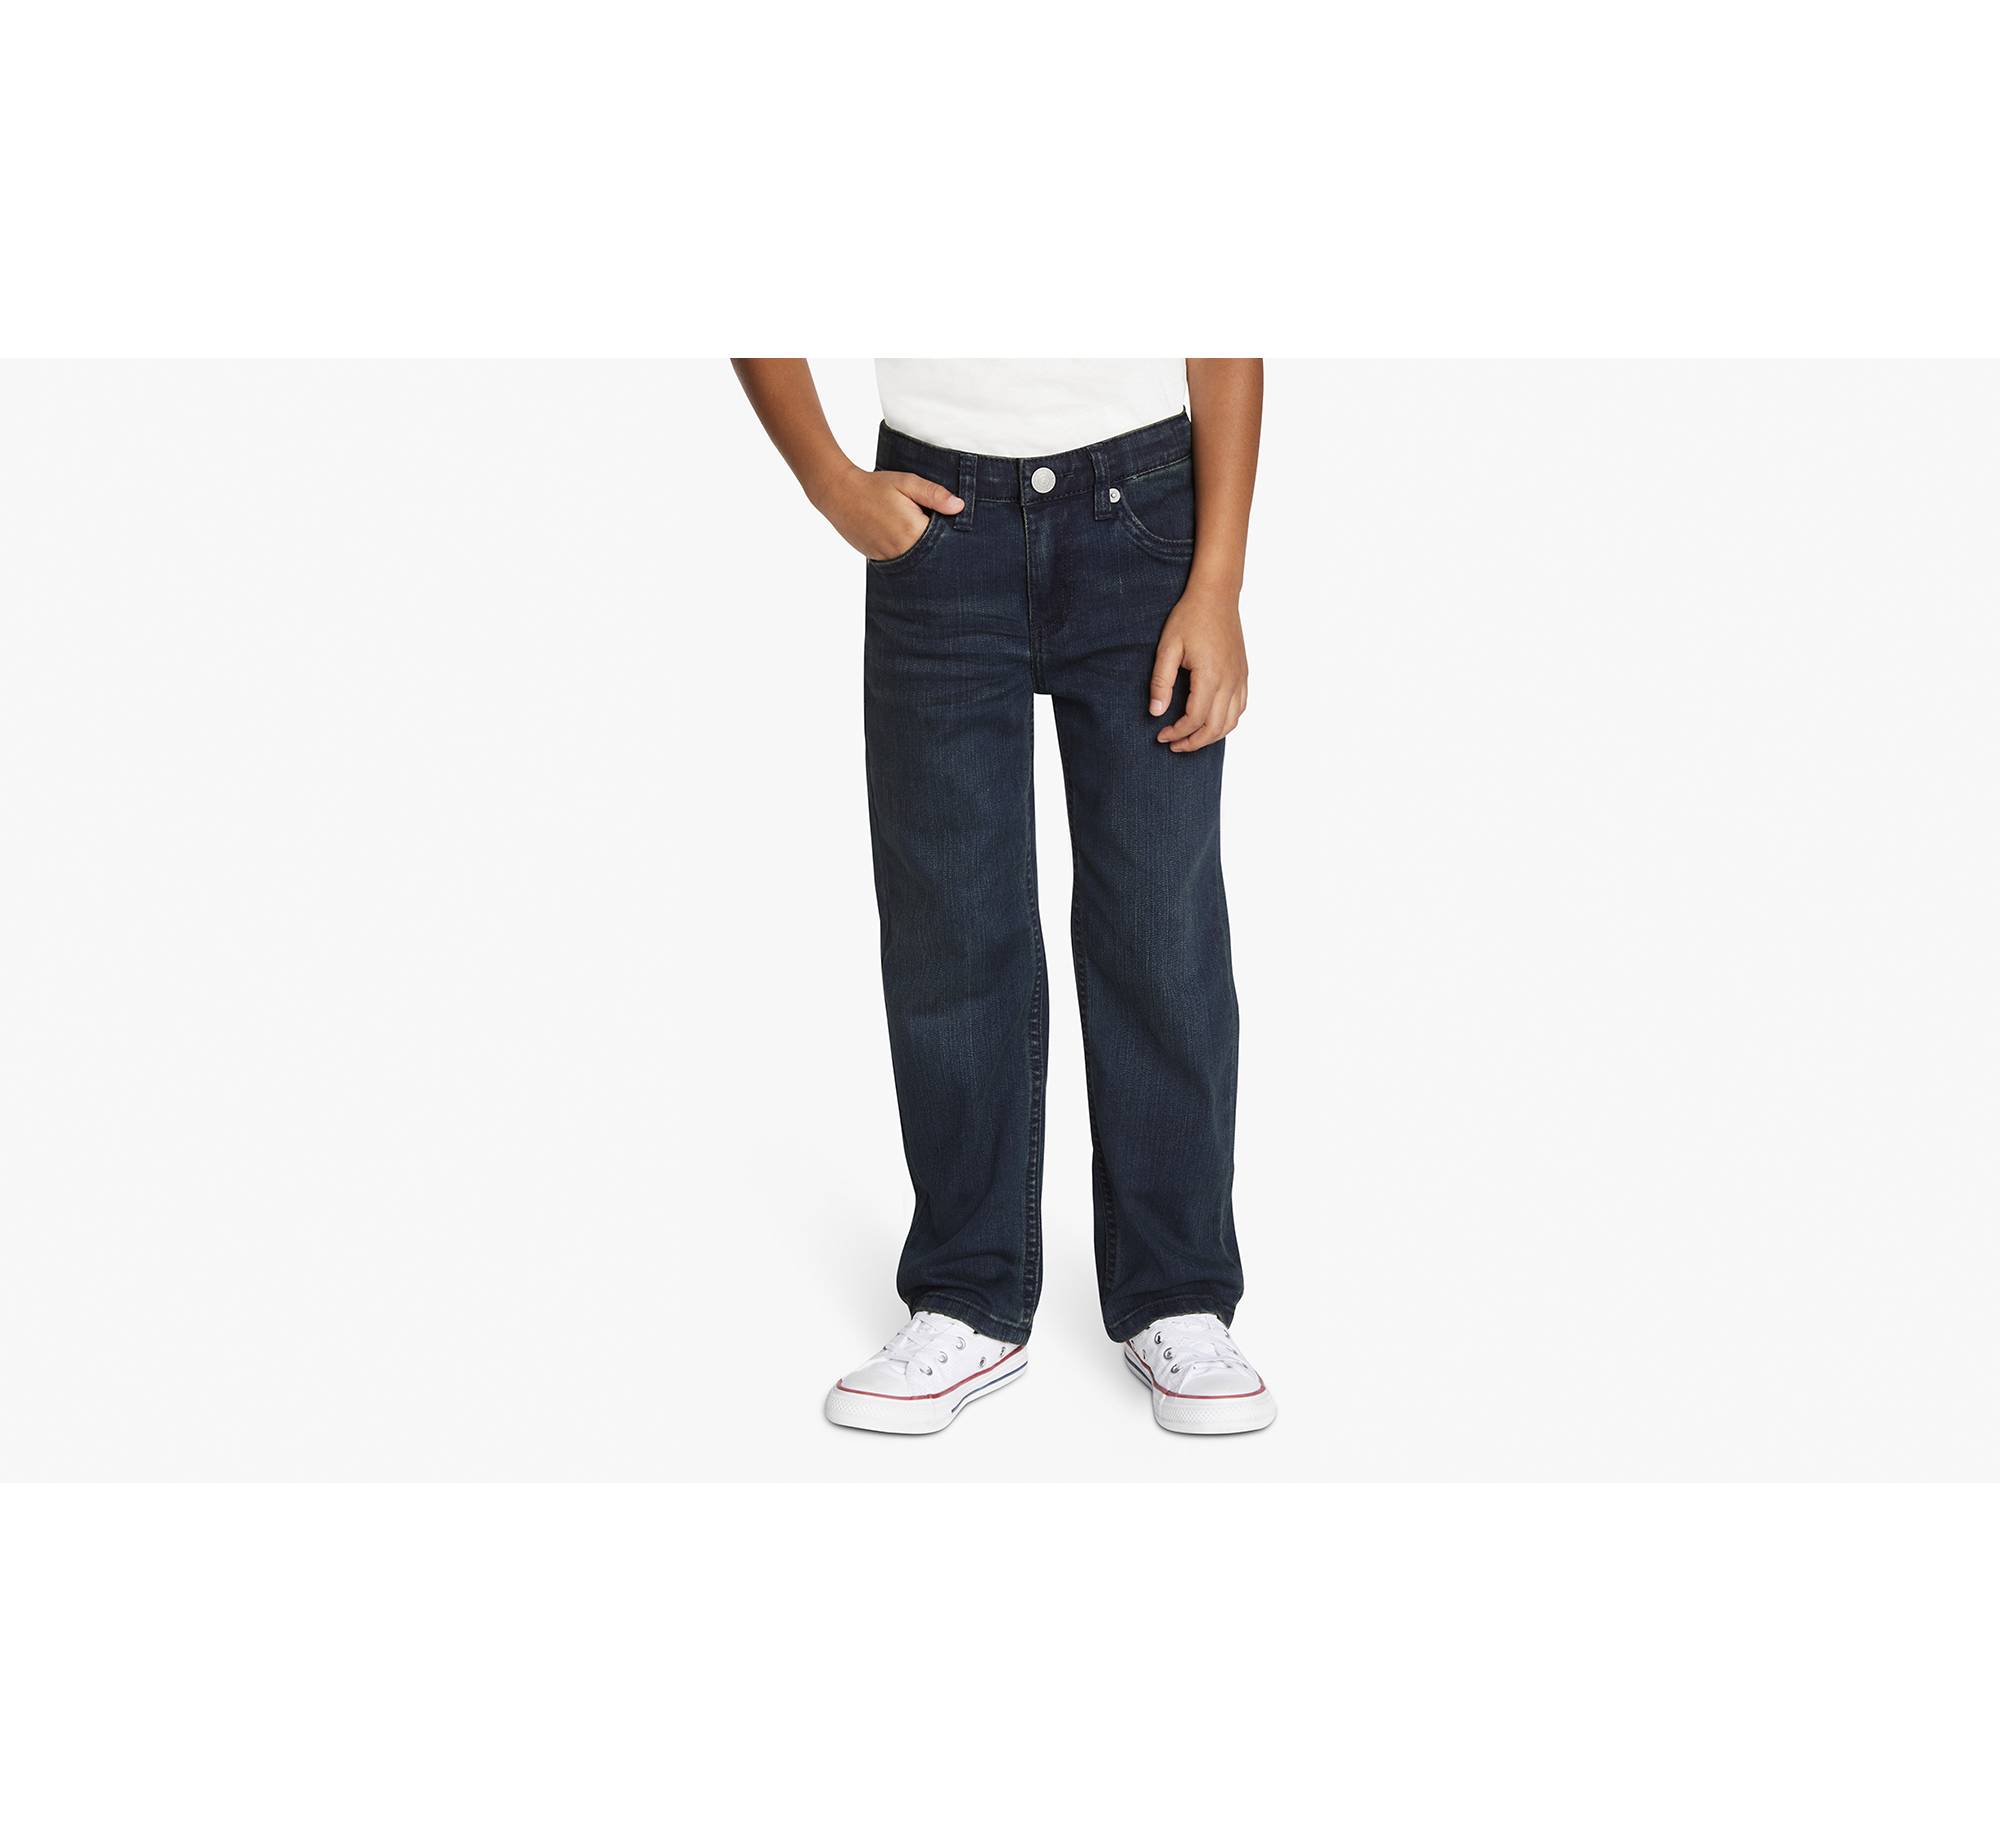 514™ Straight Fit Little Boys Jeans 4-7x 1